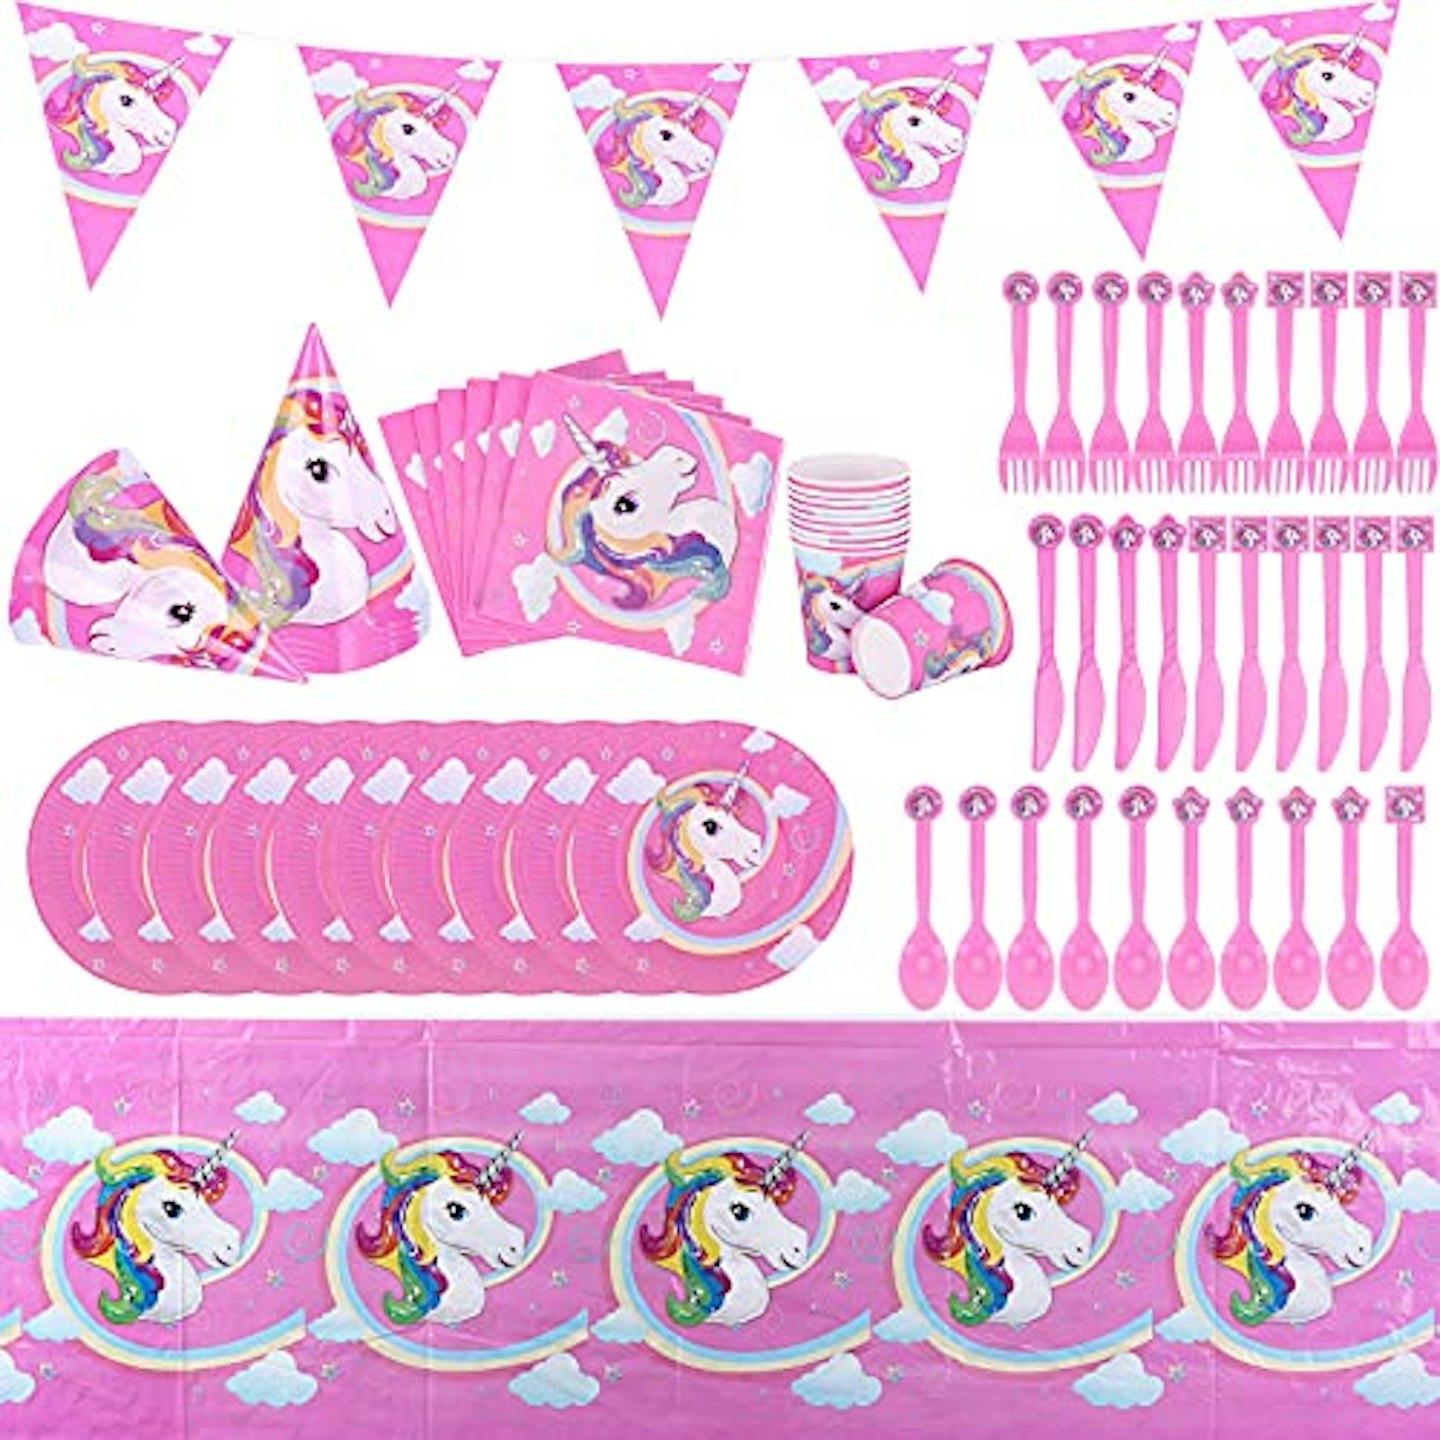 Allbests Unicorn Party Decorations Supplies